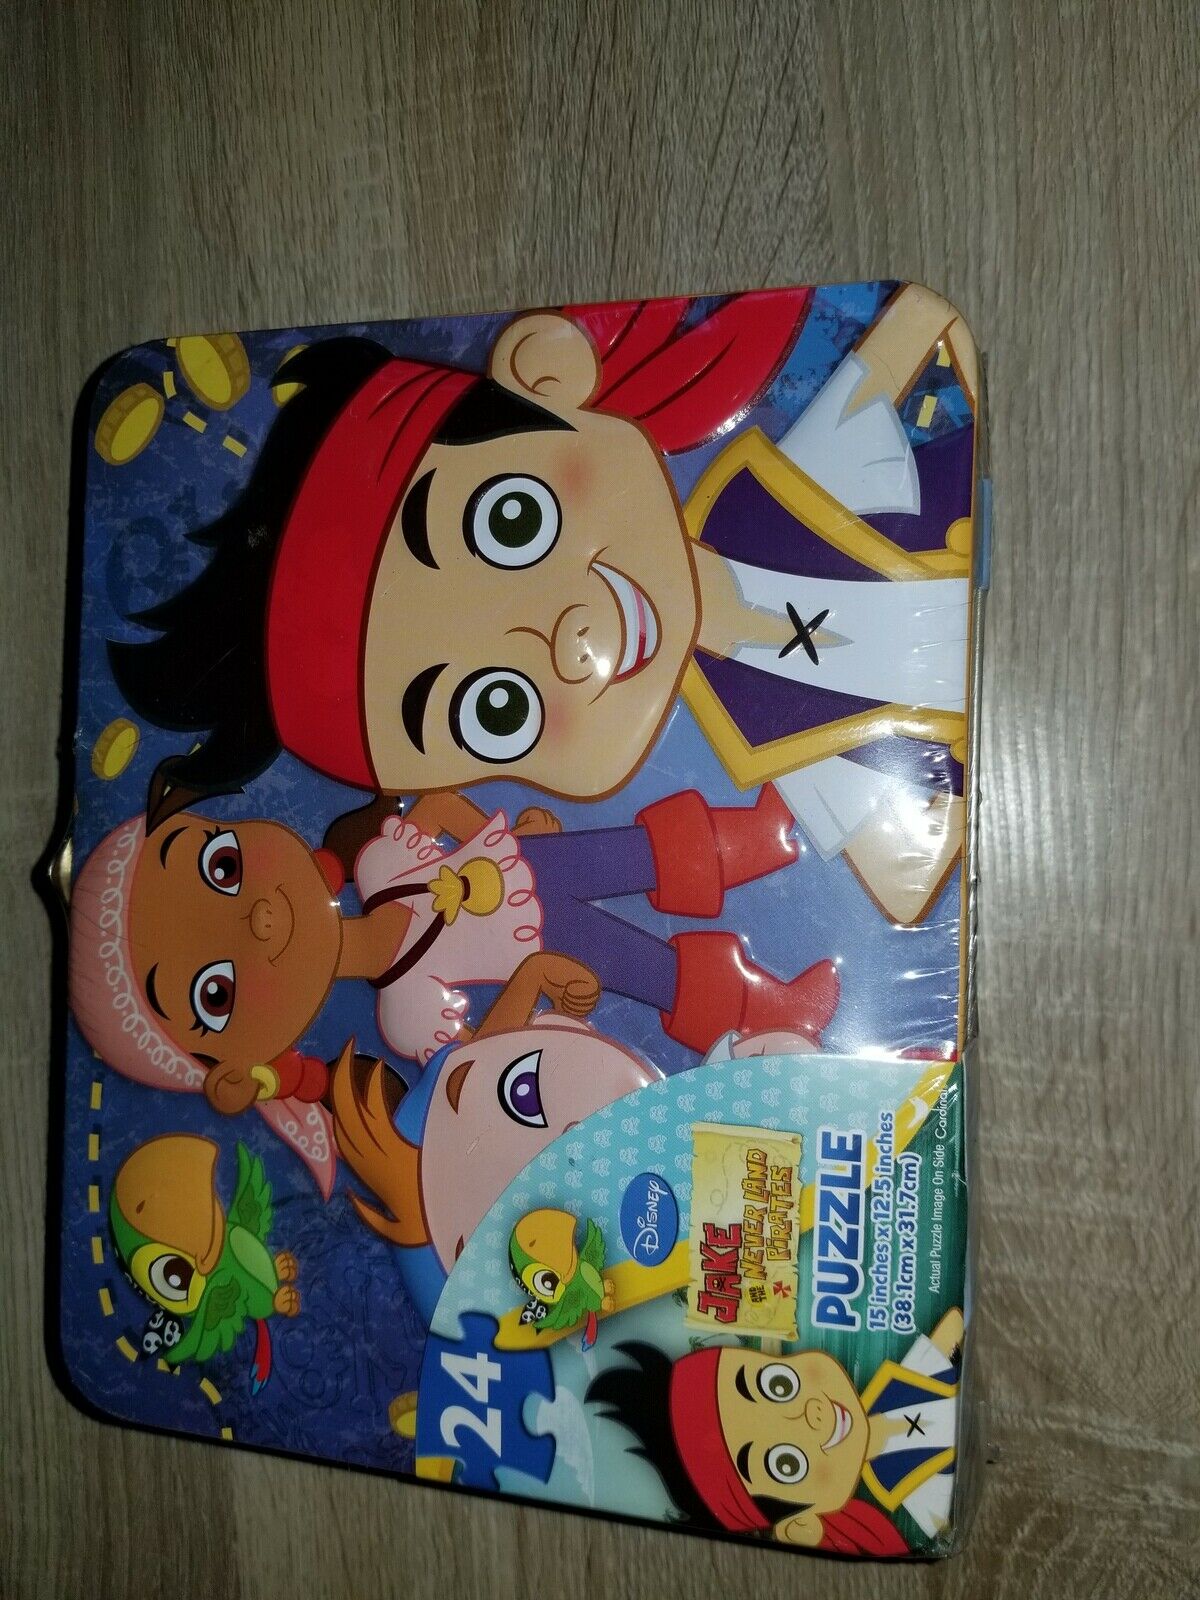 .jake And The Neverland Pirates Small Lunchbox And Puzzle Sealed